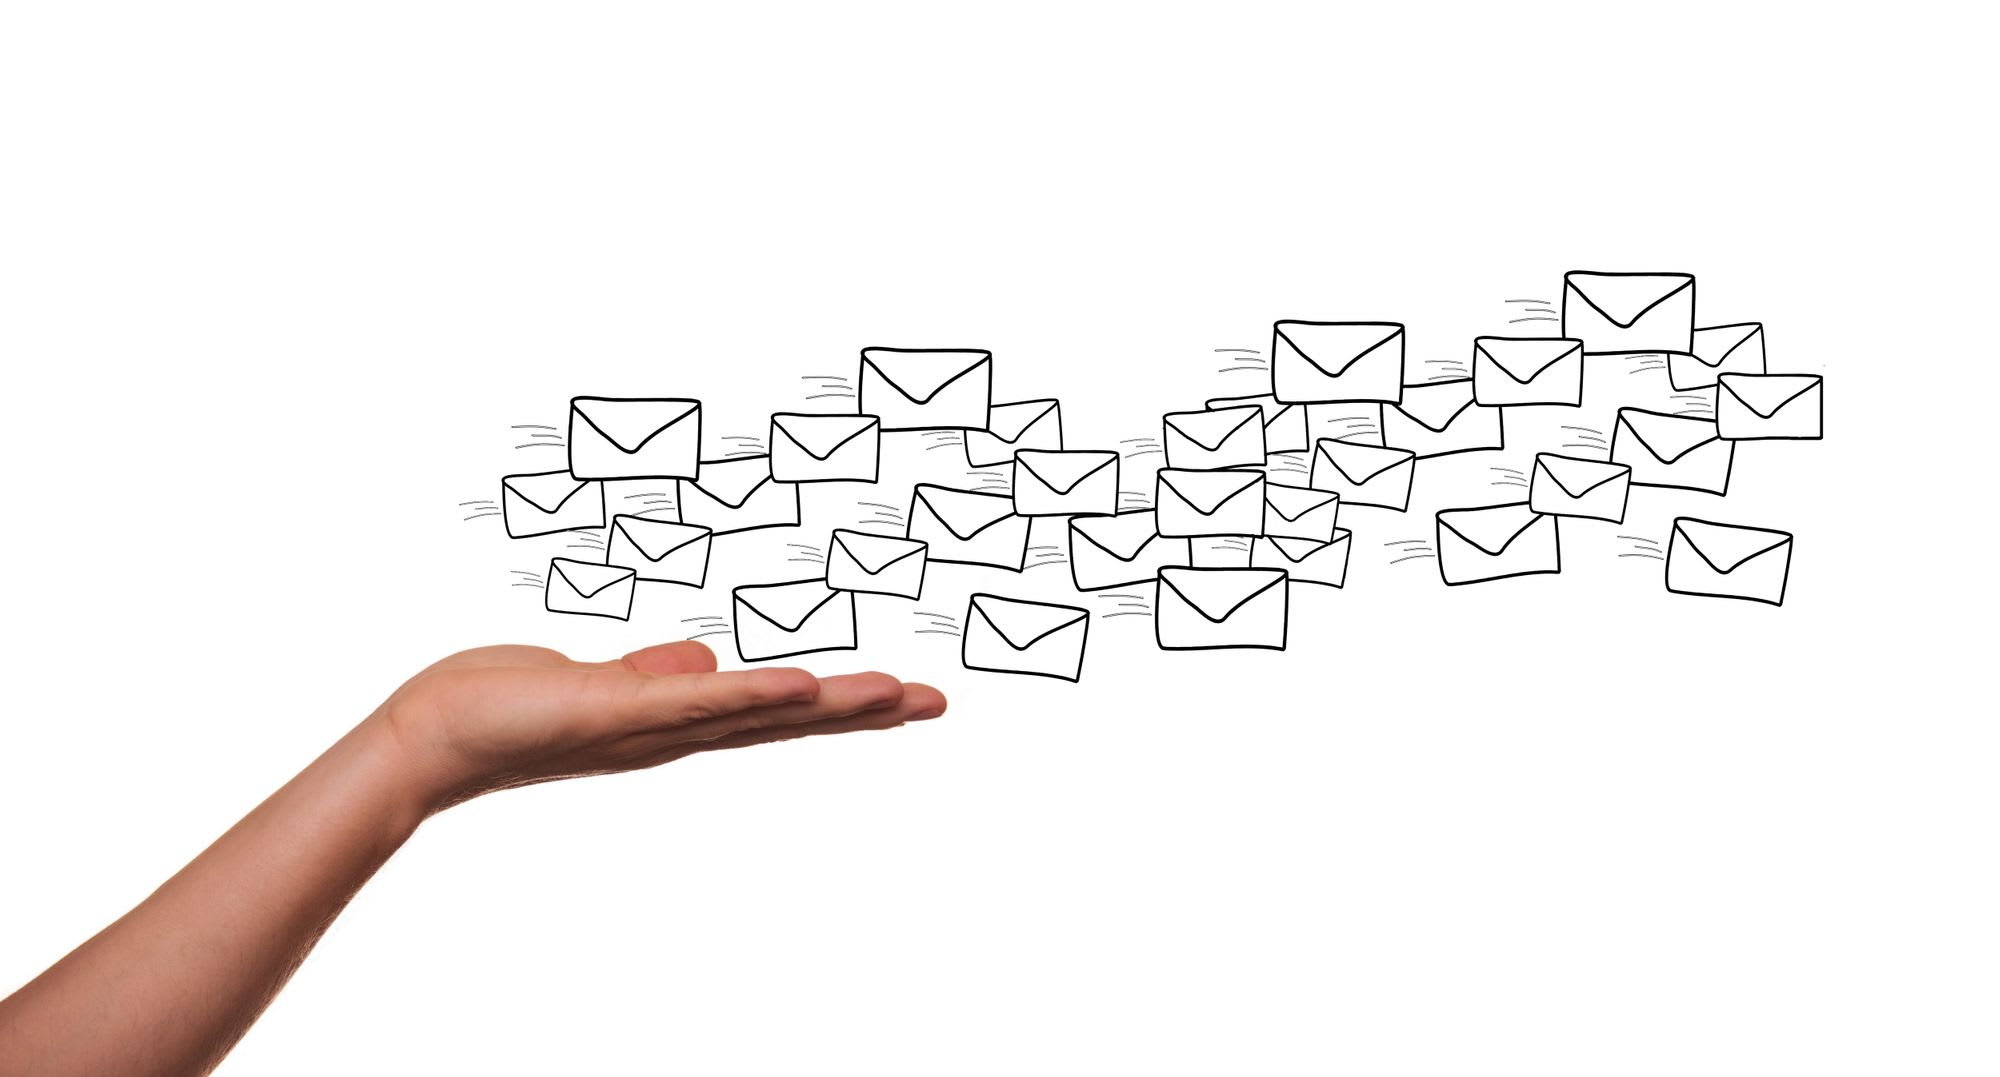 Bulk emails vs. Transactional emails - What's the difference?